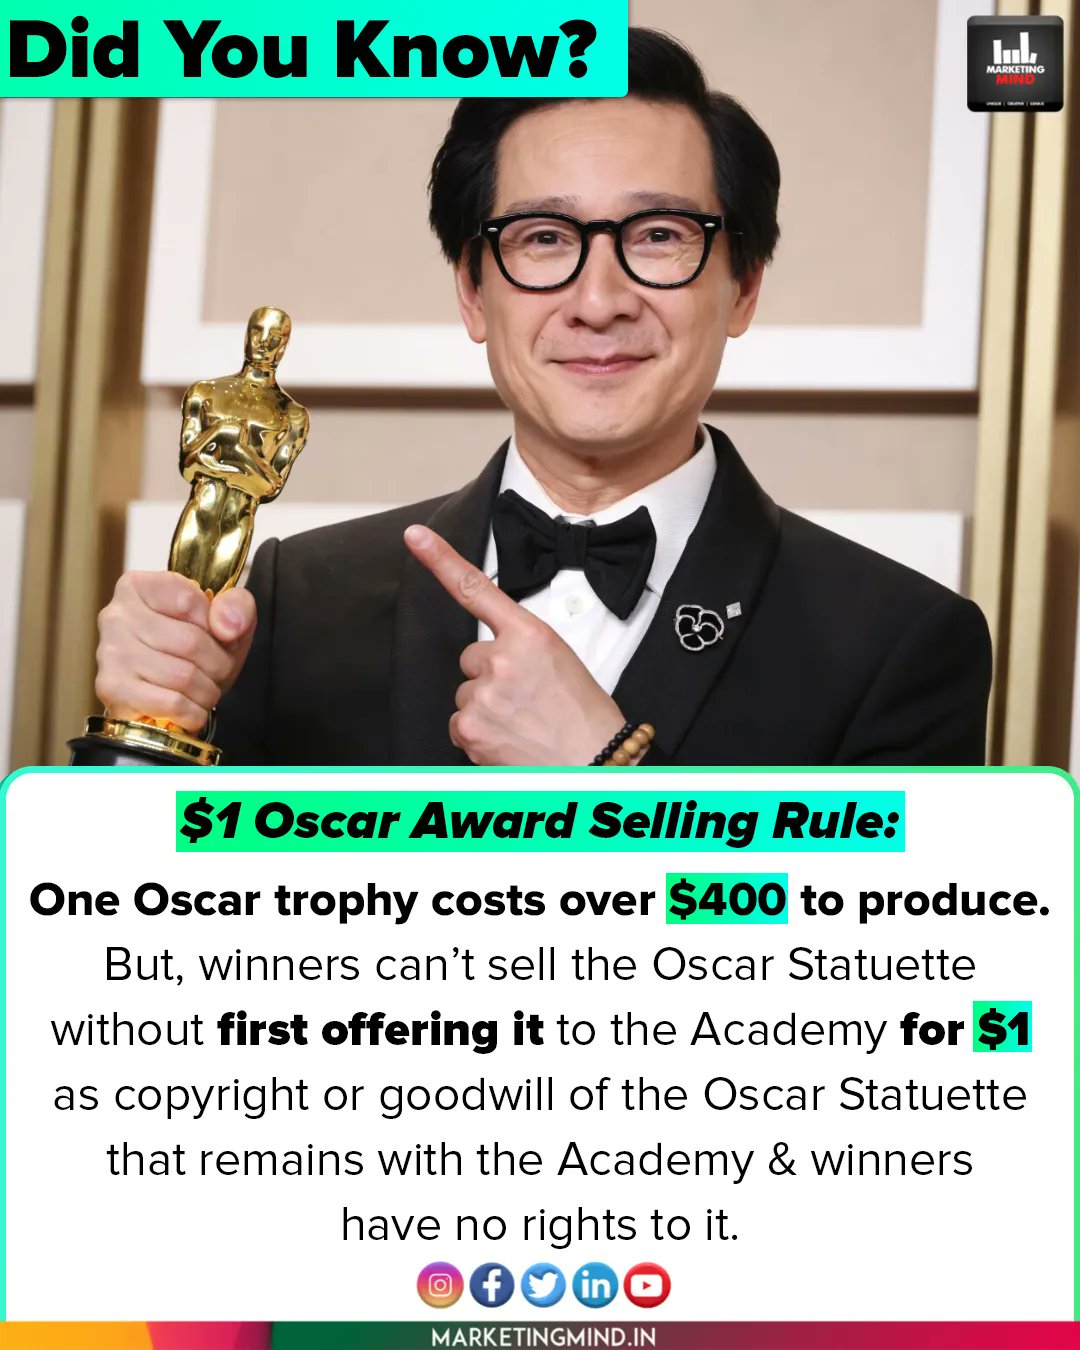 Why can't the Oscar statuette be sold?